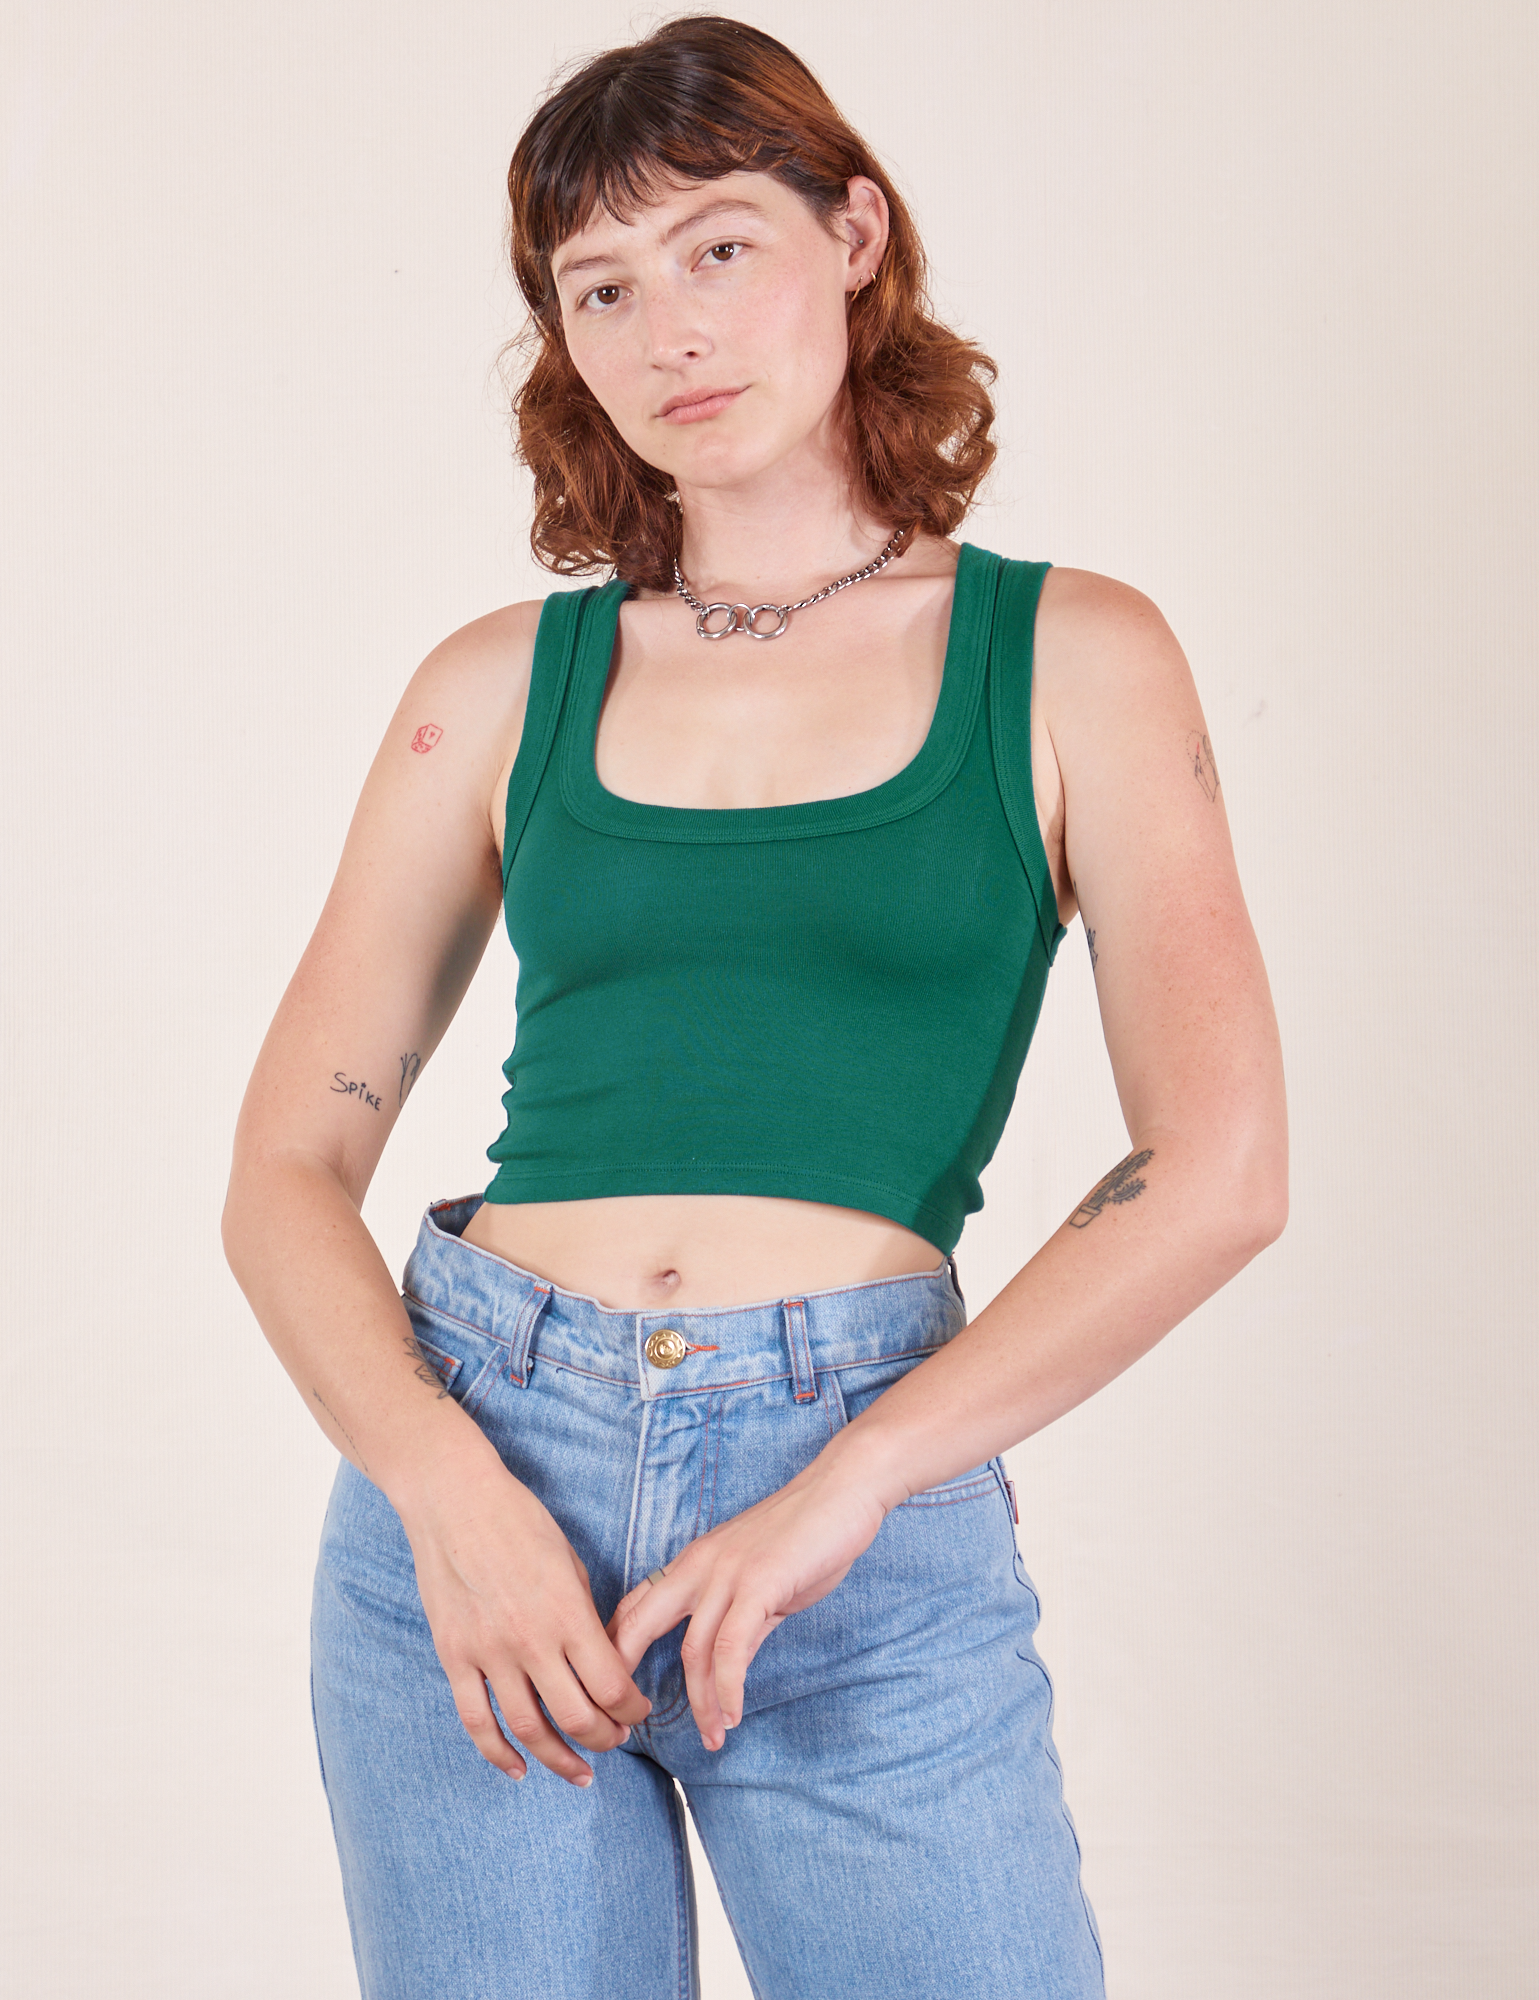 Alex is 5&#39;8&quot; and wearing P Cropped Tank Top in Hunter Green